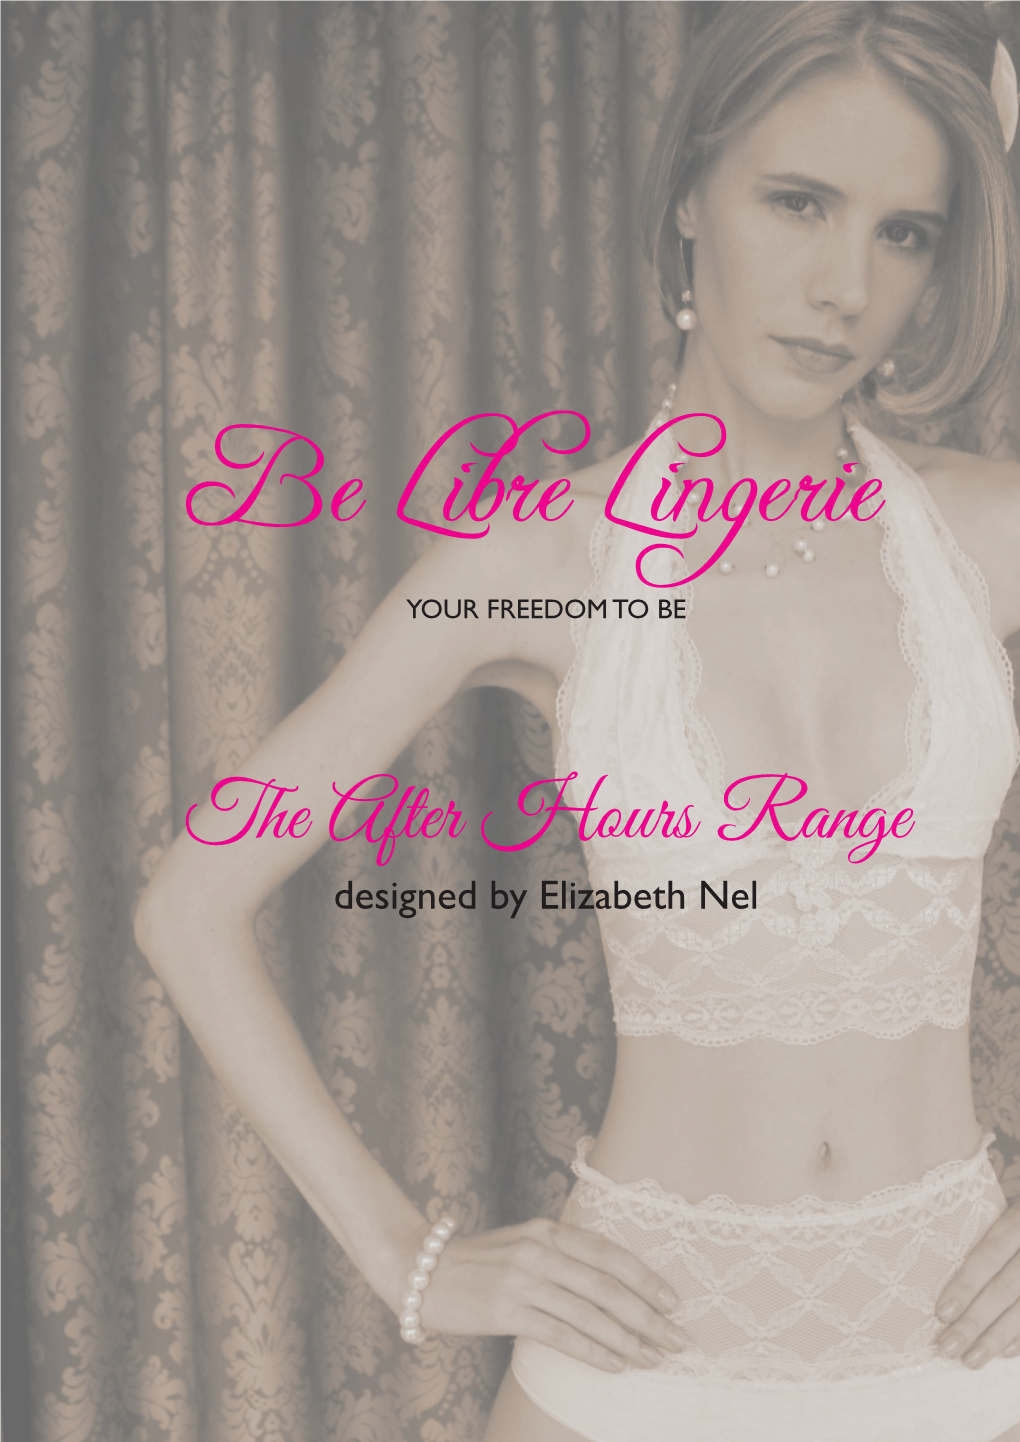 The After Hours Range Designed by Elizabeth Nel About Be Libre Lingerie